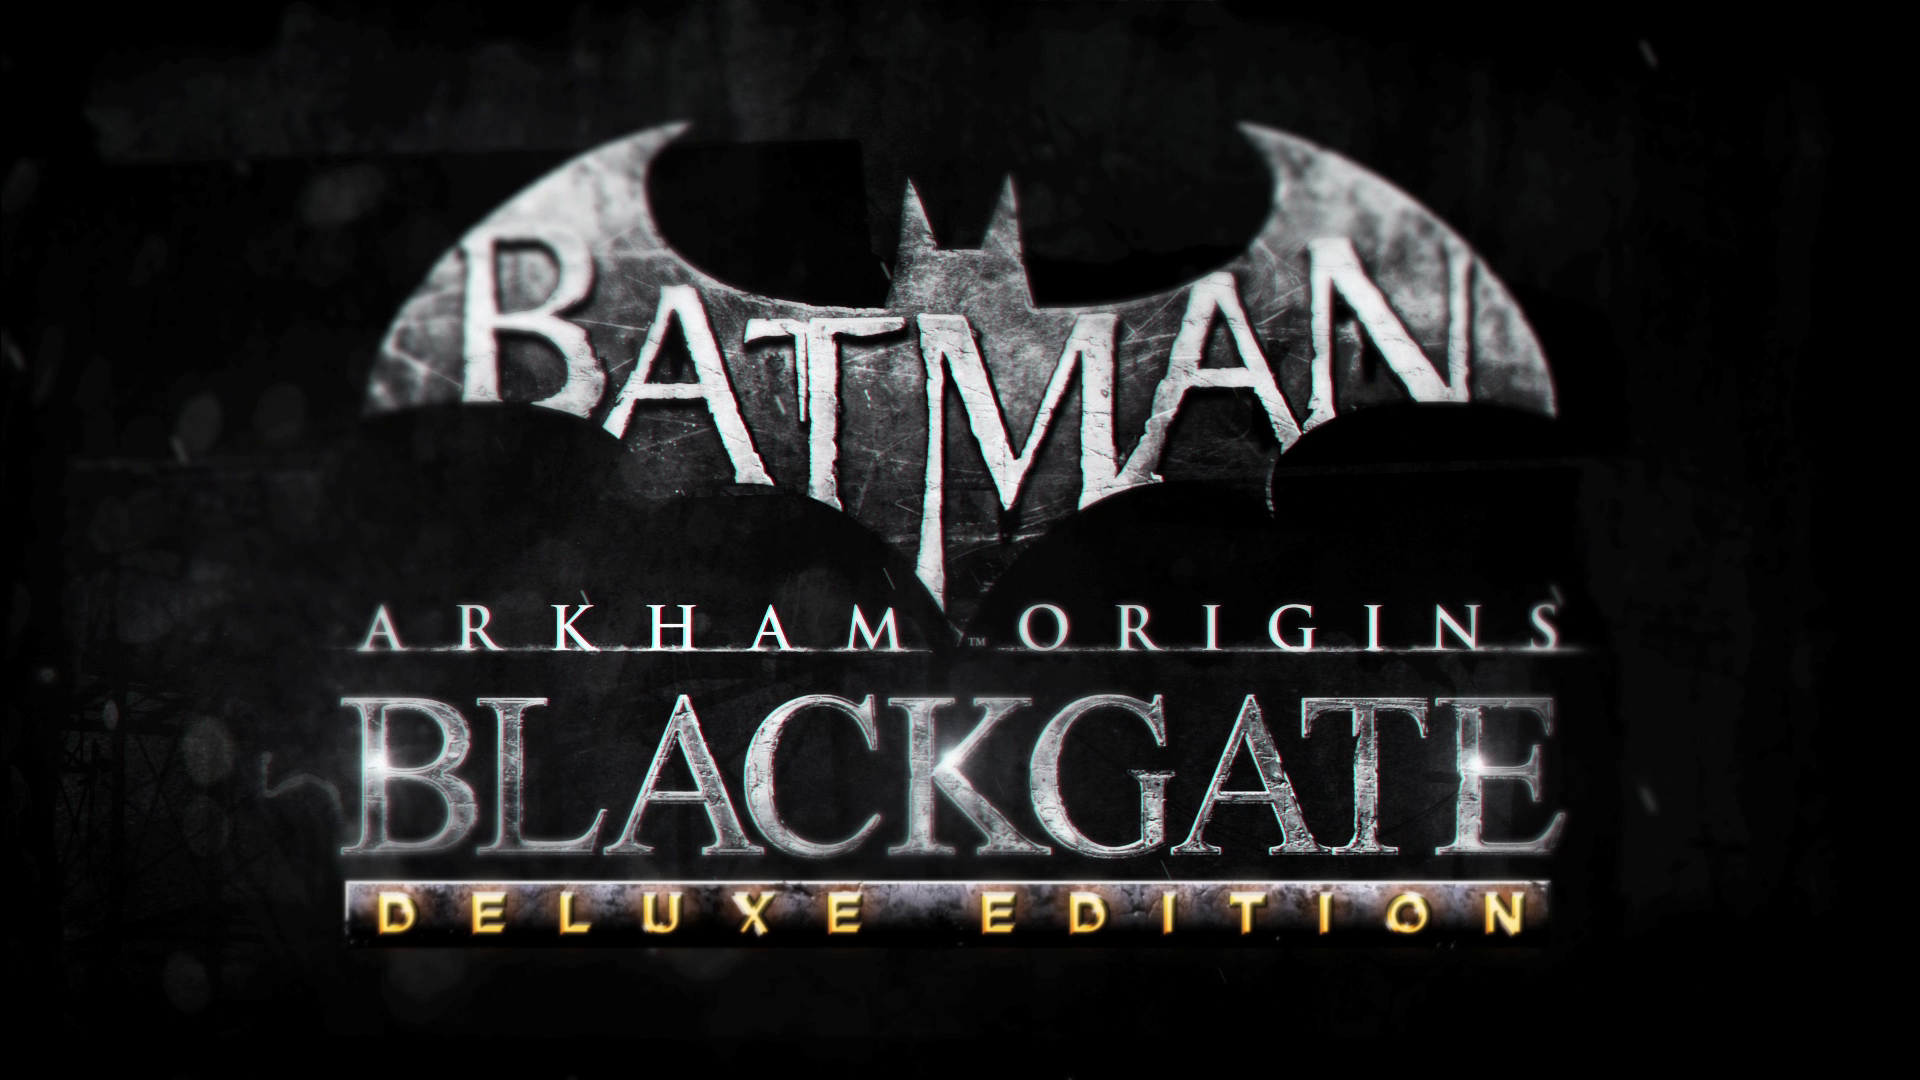 Batman: Arkham Origins Blackgate - Deluxe Edition - Codex Gamicus -  Humanity's collective gaming knowledge at your fingertips.